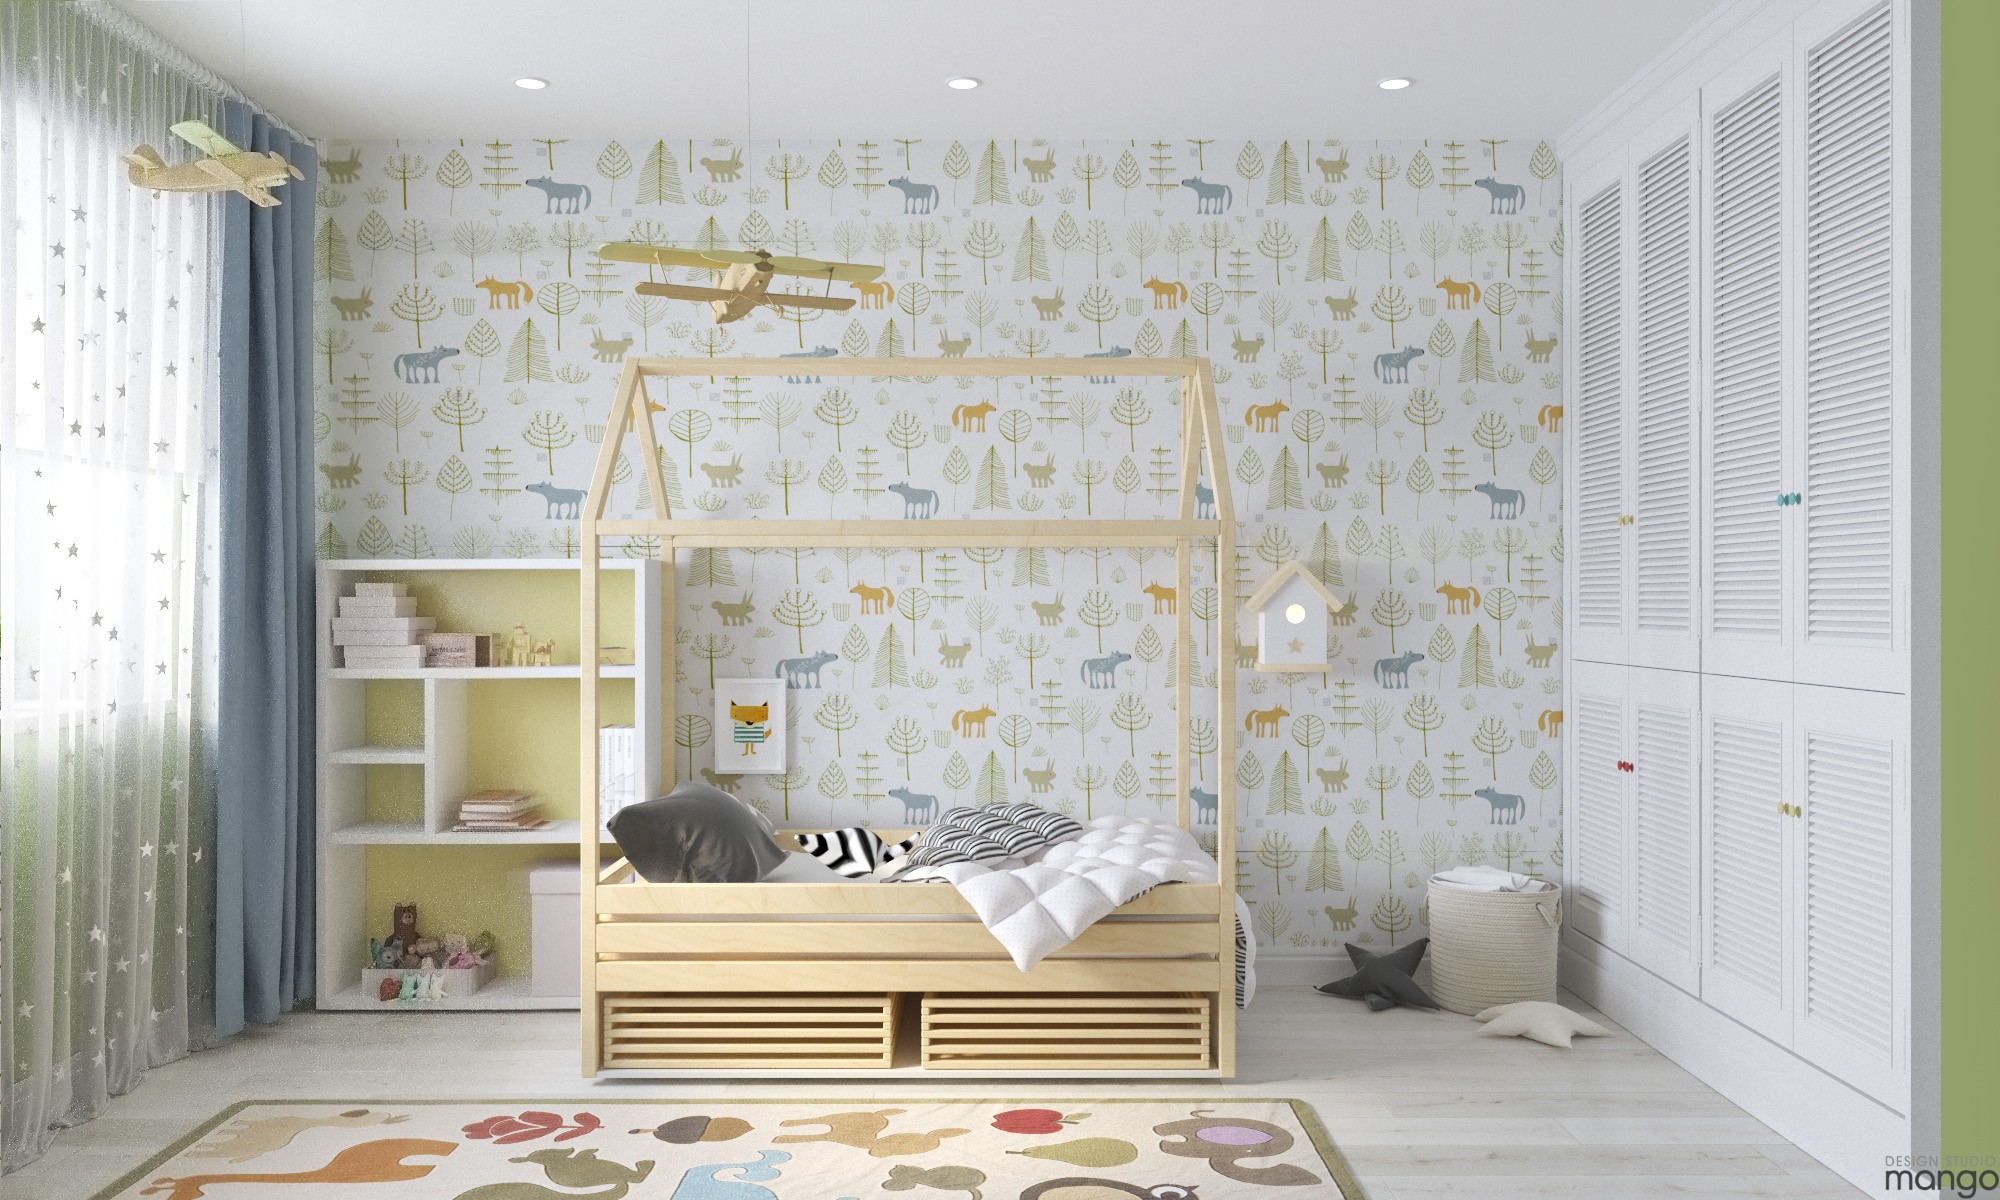 white nursery decor "width =" 2000 "height =" 1200 "srcset =" https://mileray.com/wp-content/uploads/2020/05/1588508657_250_Types-of-Cute-Kids-Room-Designs-Which-Looks-So-Colorful.jpg 2000w, https: // myfashionos .com / wp-content / uploads / 2016/11 / Design-Studio-Mango3-300x180.jpg 300w, https://mileray.com/wp-content/uploads/2016/11/Design-Studio-Mango3-768x461. jpg 768w, https://mileray.com/wp-content/uploads/2016/11/Design-Studio-Mango3-1024x614.jpg 1024w, https://mileray.com/wp-content/uploads/2016/11/ Design-Studio-Mango3-696x418.jpg 696w, https://mileray.com/wp-content/uploads/2016/11/Design-Studio-Mango3-1068x641.jpg 1068w, https://mileray.com/wp- Content / Uploads / 2016/11 / Design-Studio-Mango3-700x420.jpg 700w "sizes =" (maximum width: 2000px) 100vw, 2000px